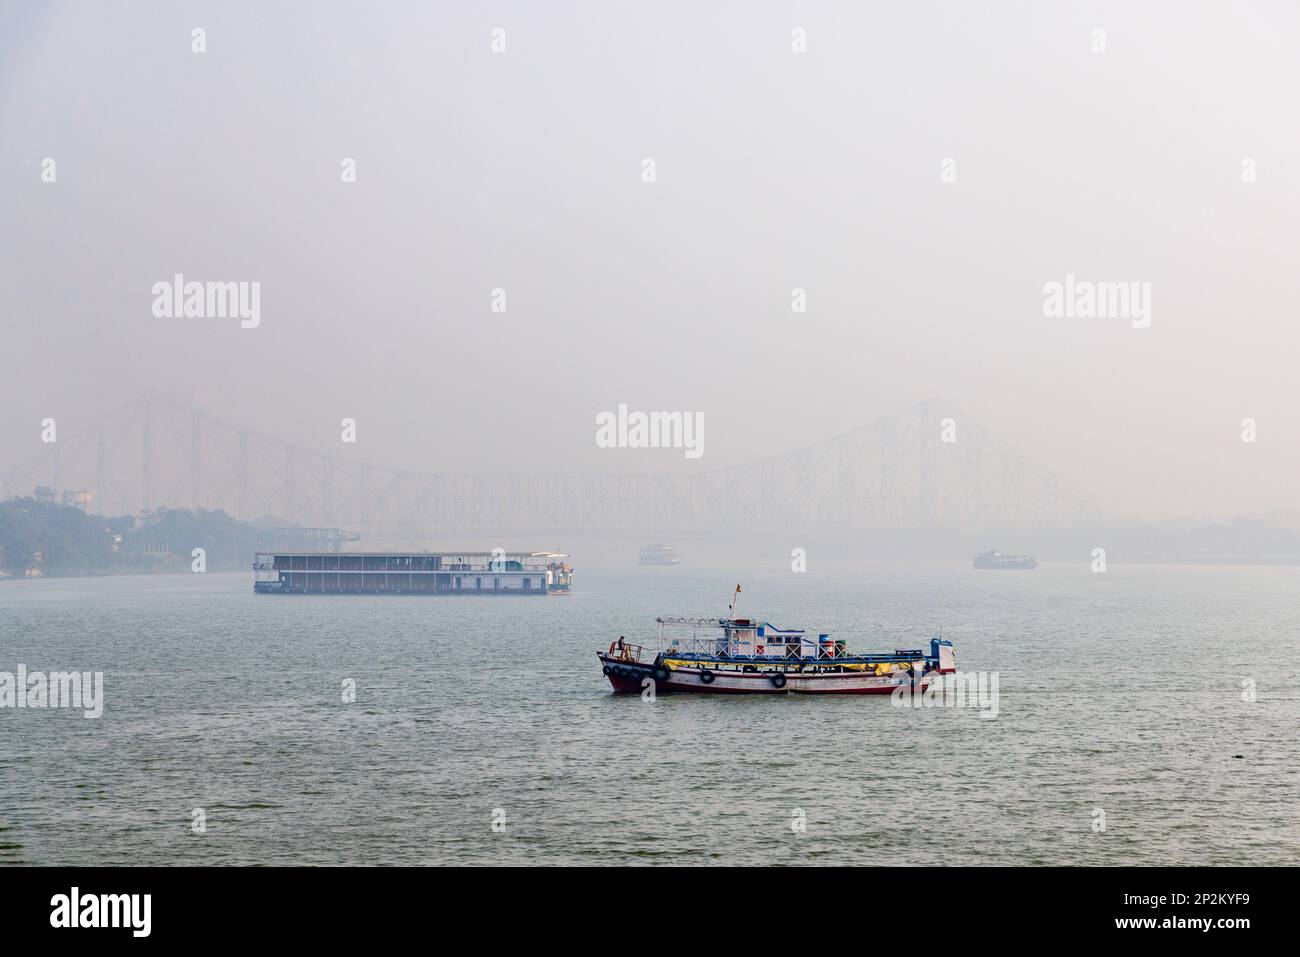 Boats by the Howrah Bridge in early morning smoggy atmosphere over the Hooghly River at Kolkata (Calcutta), capital city of West Bengal, India Stock Photo